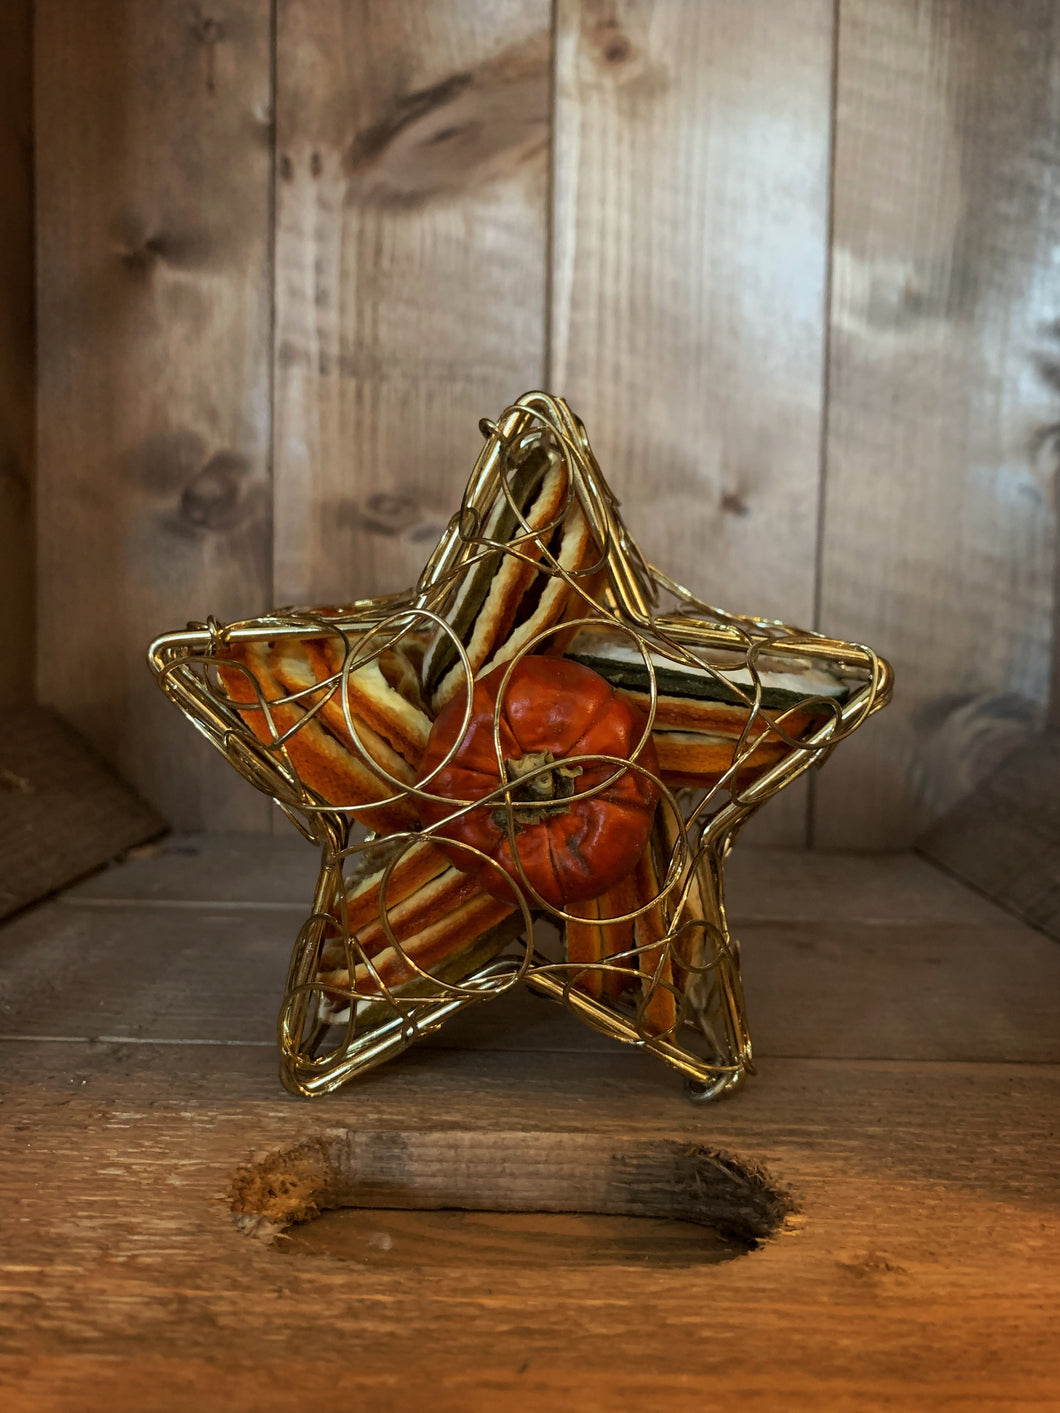 Image of Scent of the Season Star Centrepiece, a gold wire box in the shape of a star filled with pot pourri including dried orange and green orange slices and a dried mini pumpkin